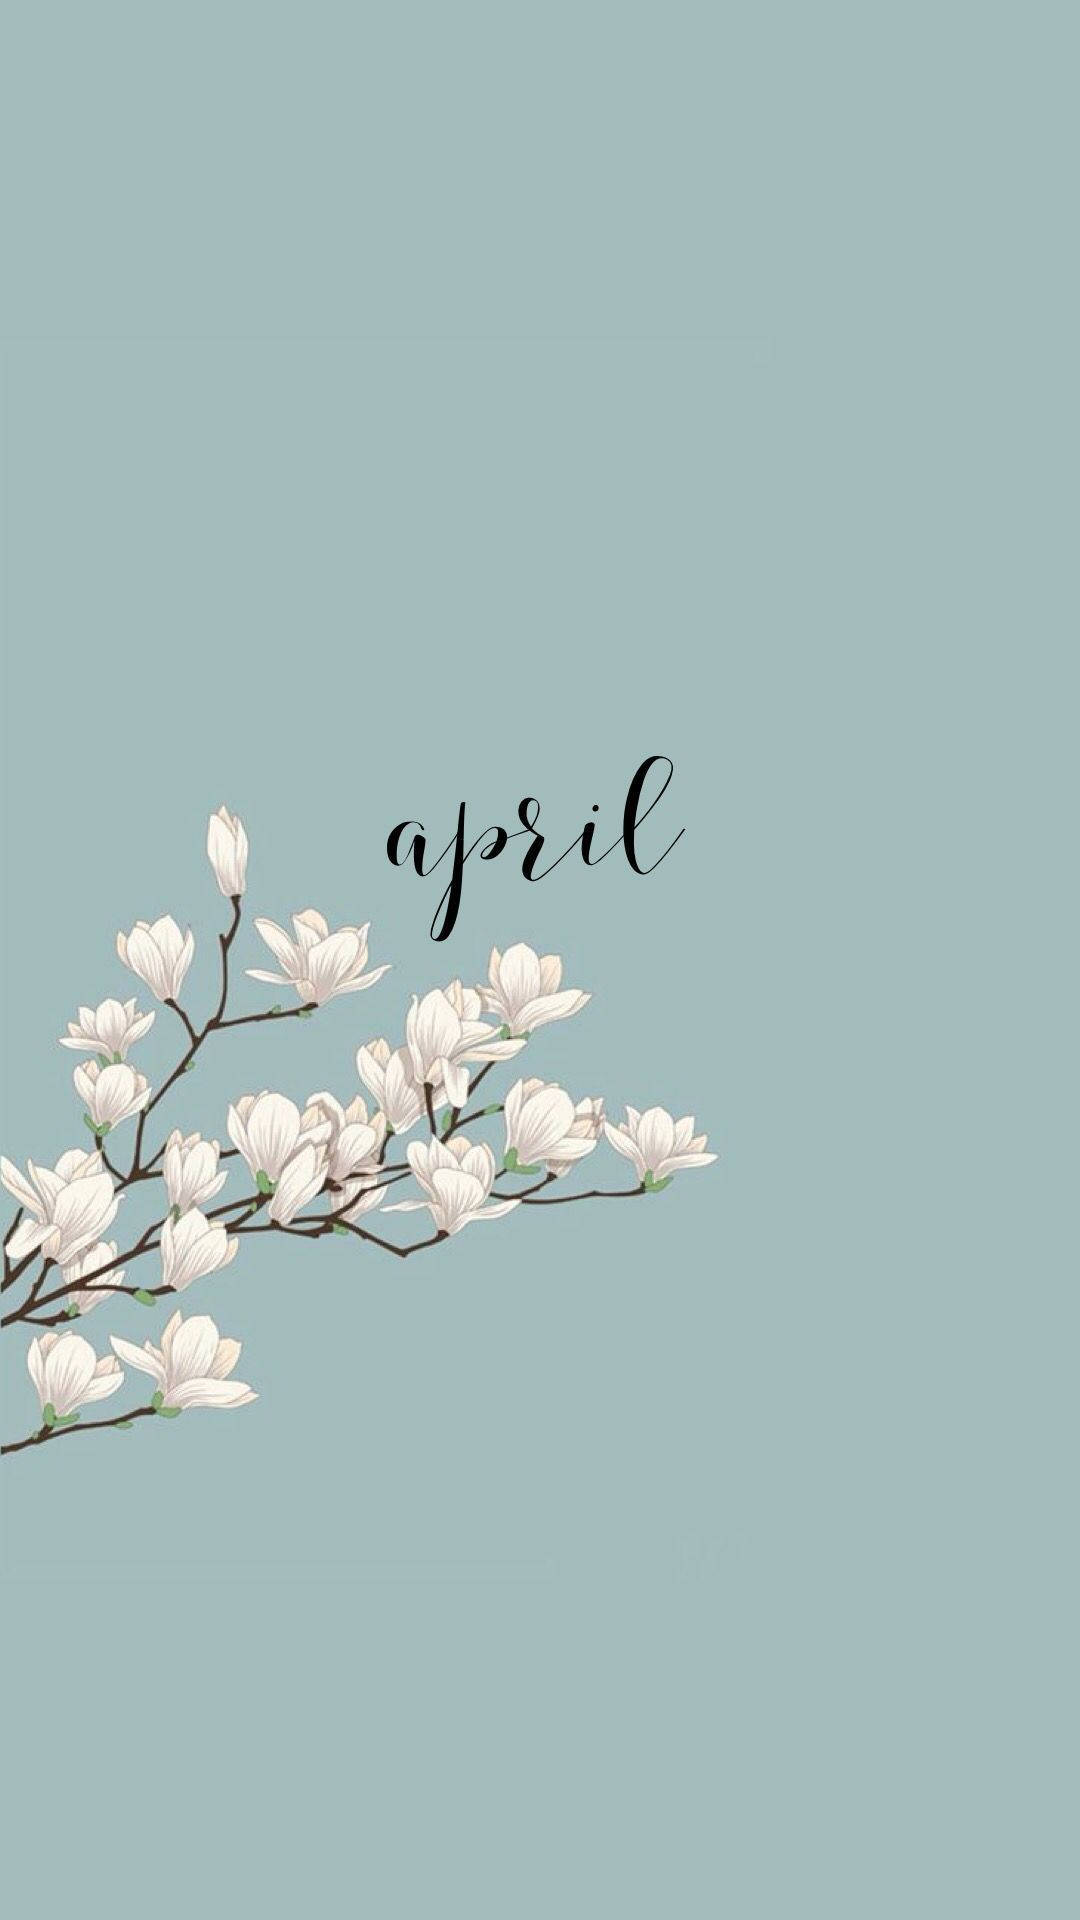 Cute April Spring Background